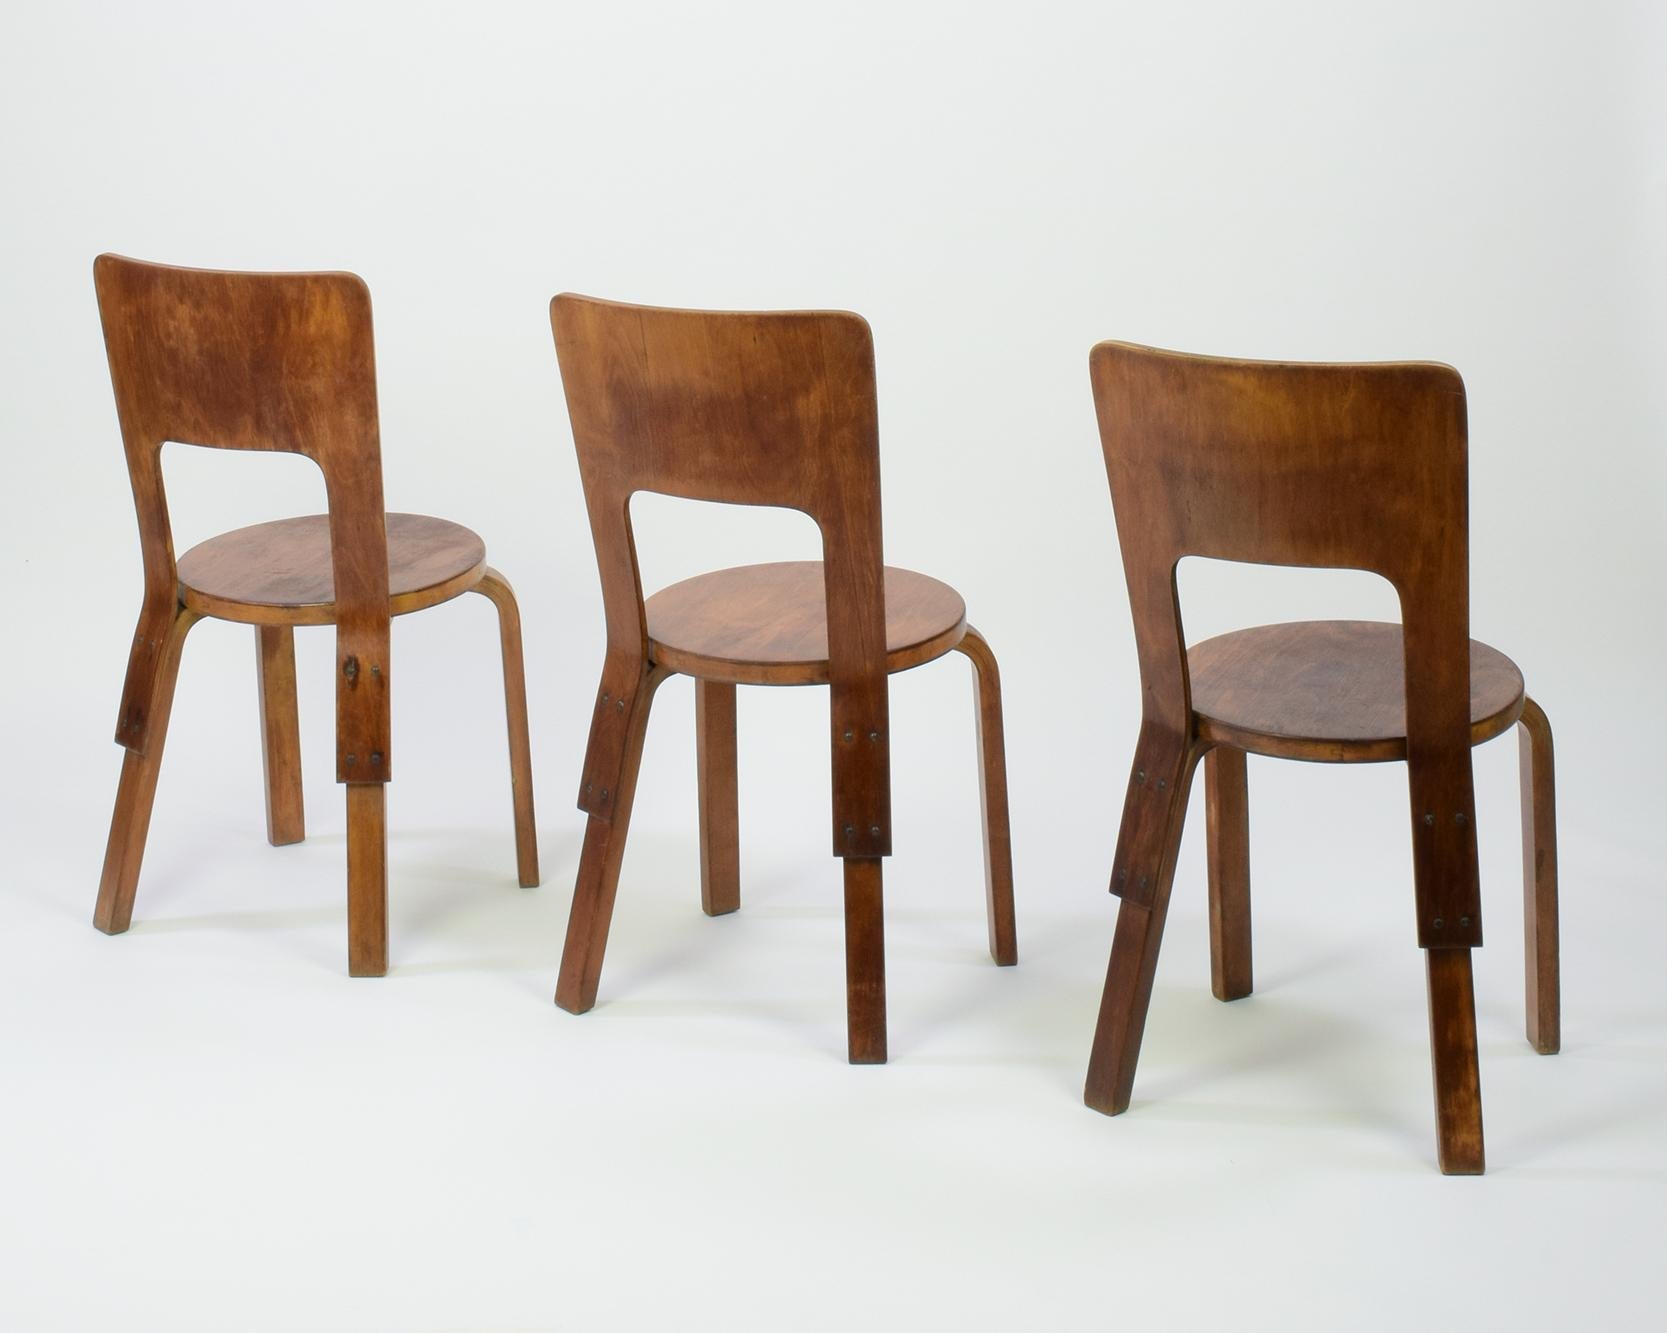 Finnish Alvar Aalto, Set of 3 Model 66 Chairs, 1933, Original Early Production